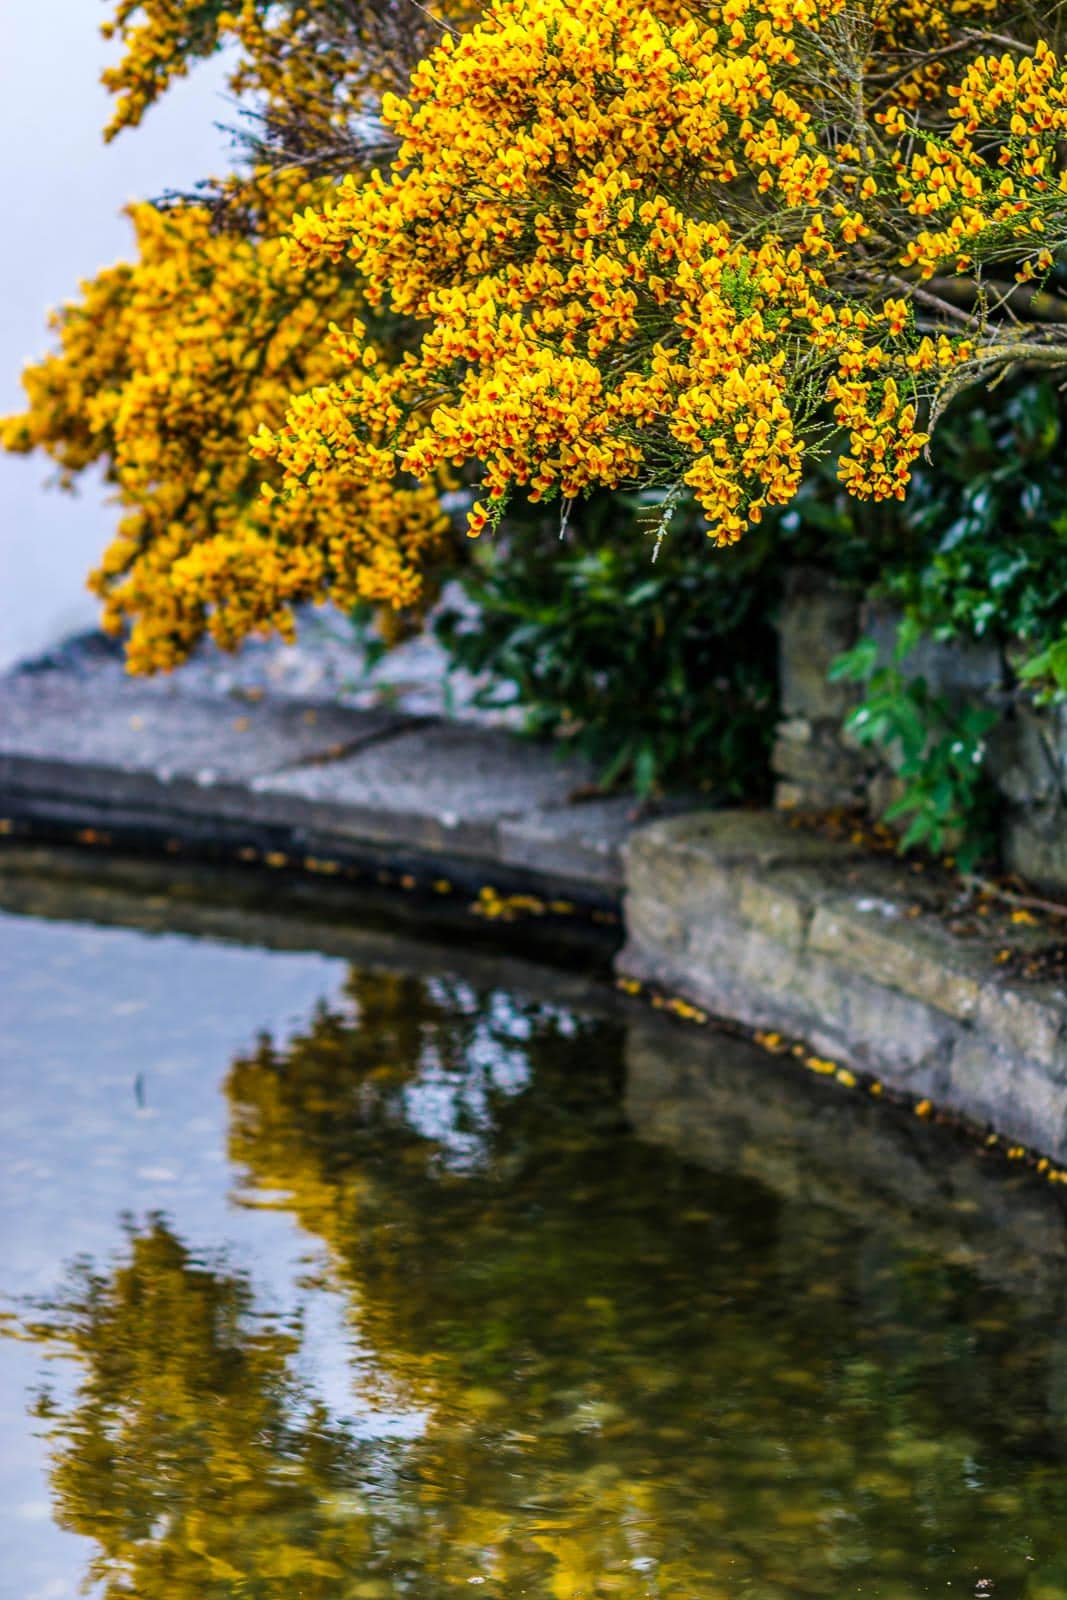 A pond with a yellow tree in the middle of it.